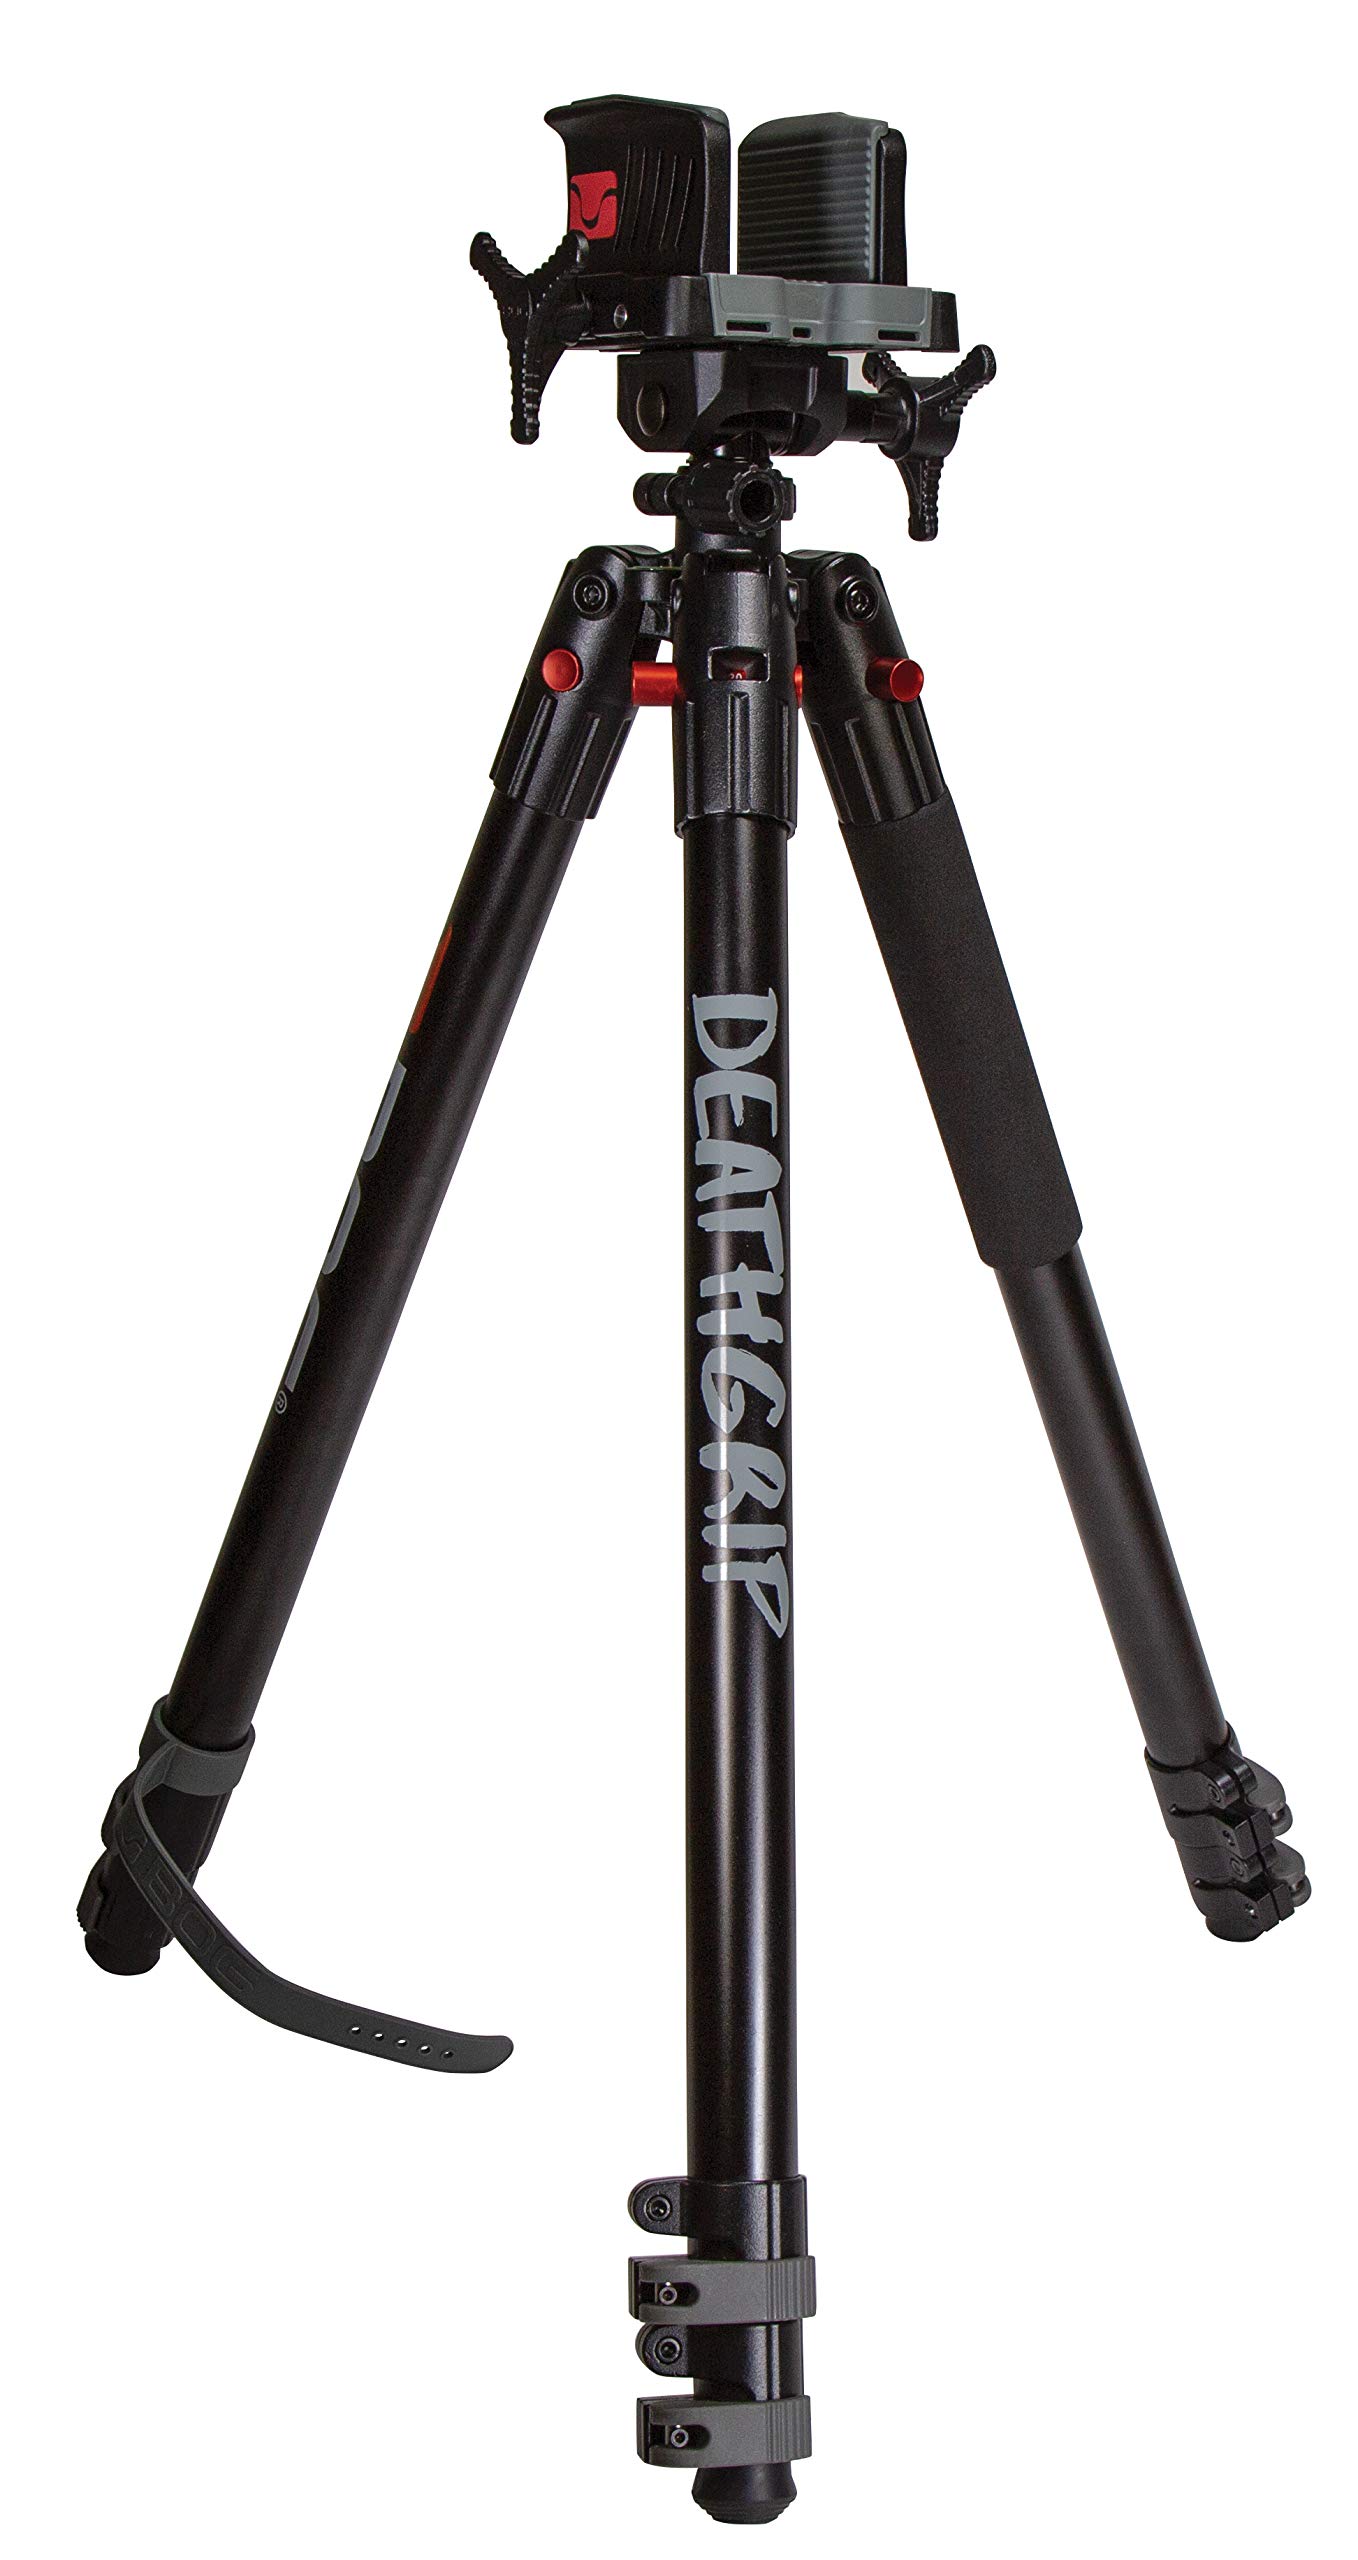 BOG DeathGrip Tripods with Durable Aluminum and Carbon Fiber Frames, Lightweight, Stable Design, Bubble Level, Adjustable Legs, and Hands-Free Operation for Hunting, Shooting, and Outdoors